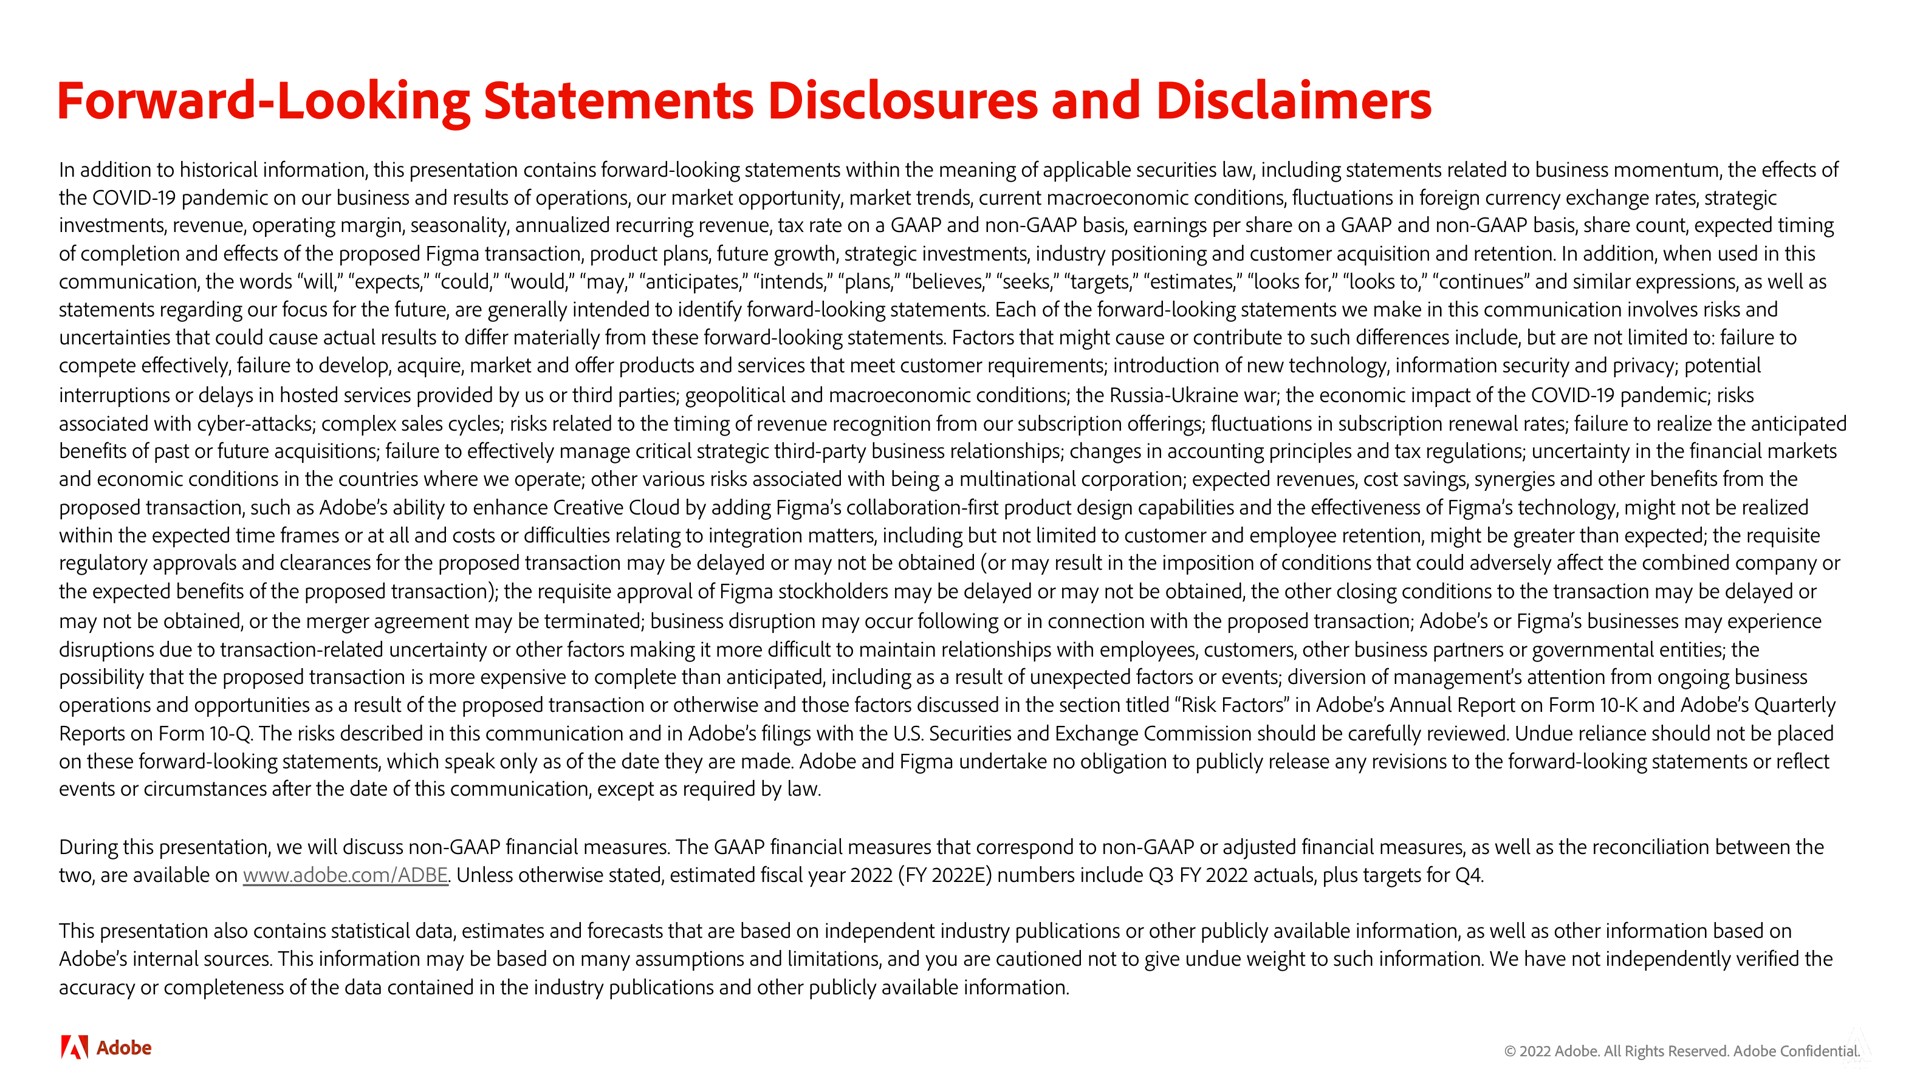 forward looking statements disclosures and disclaimers | Adobe